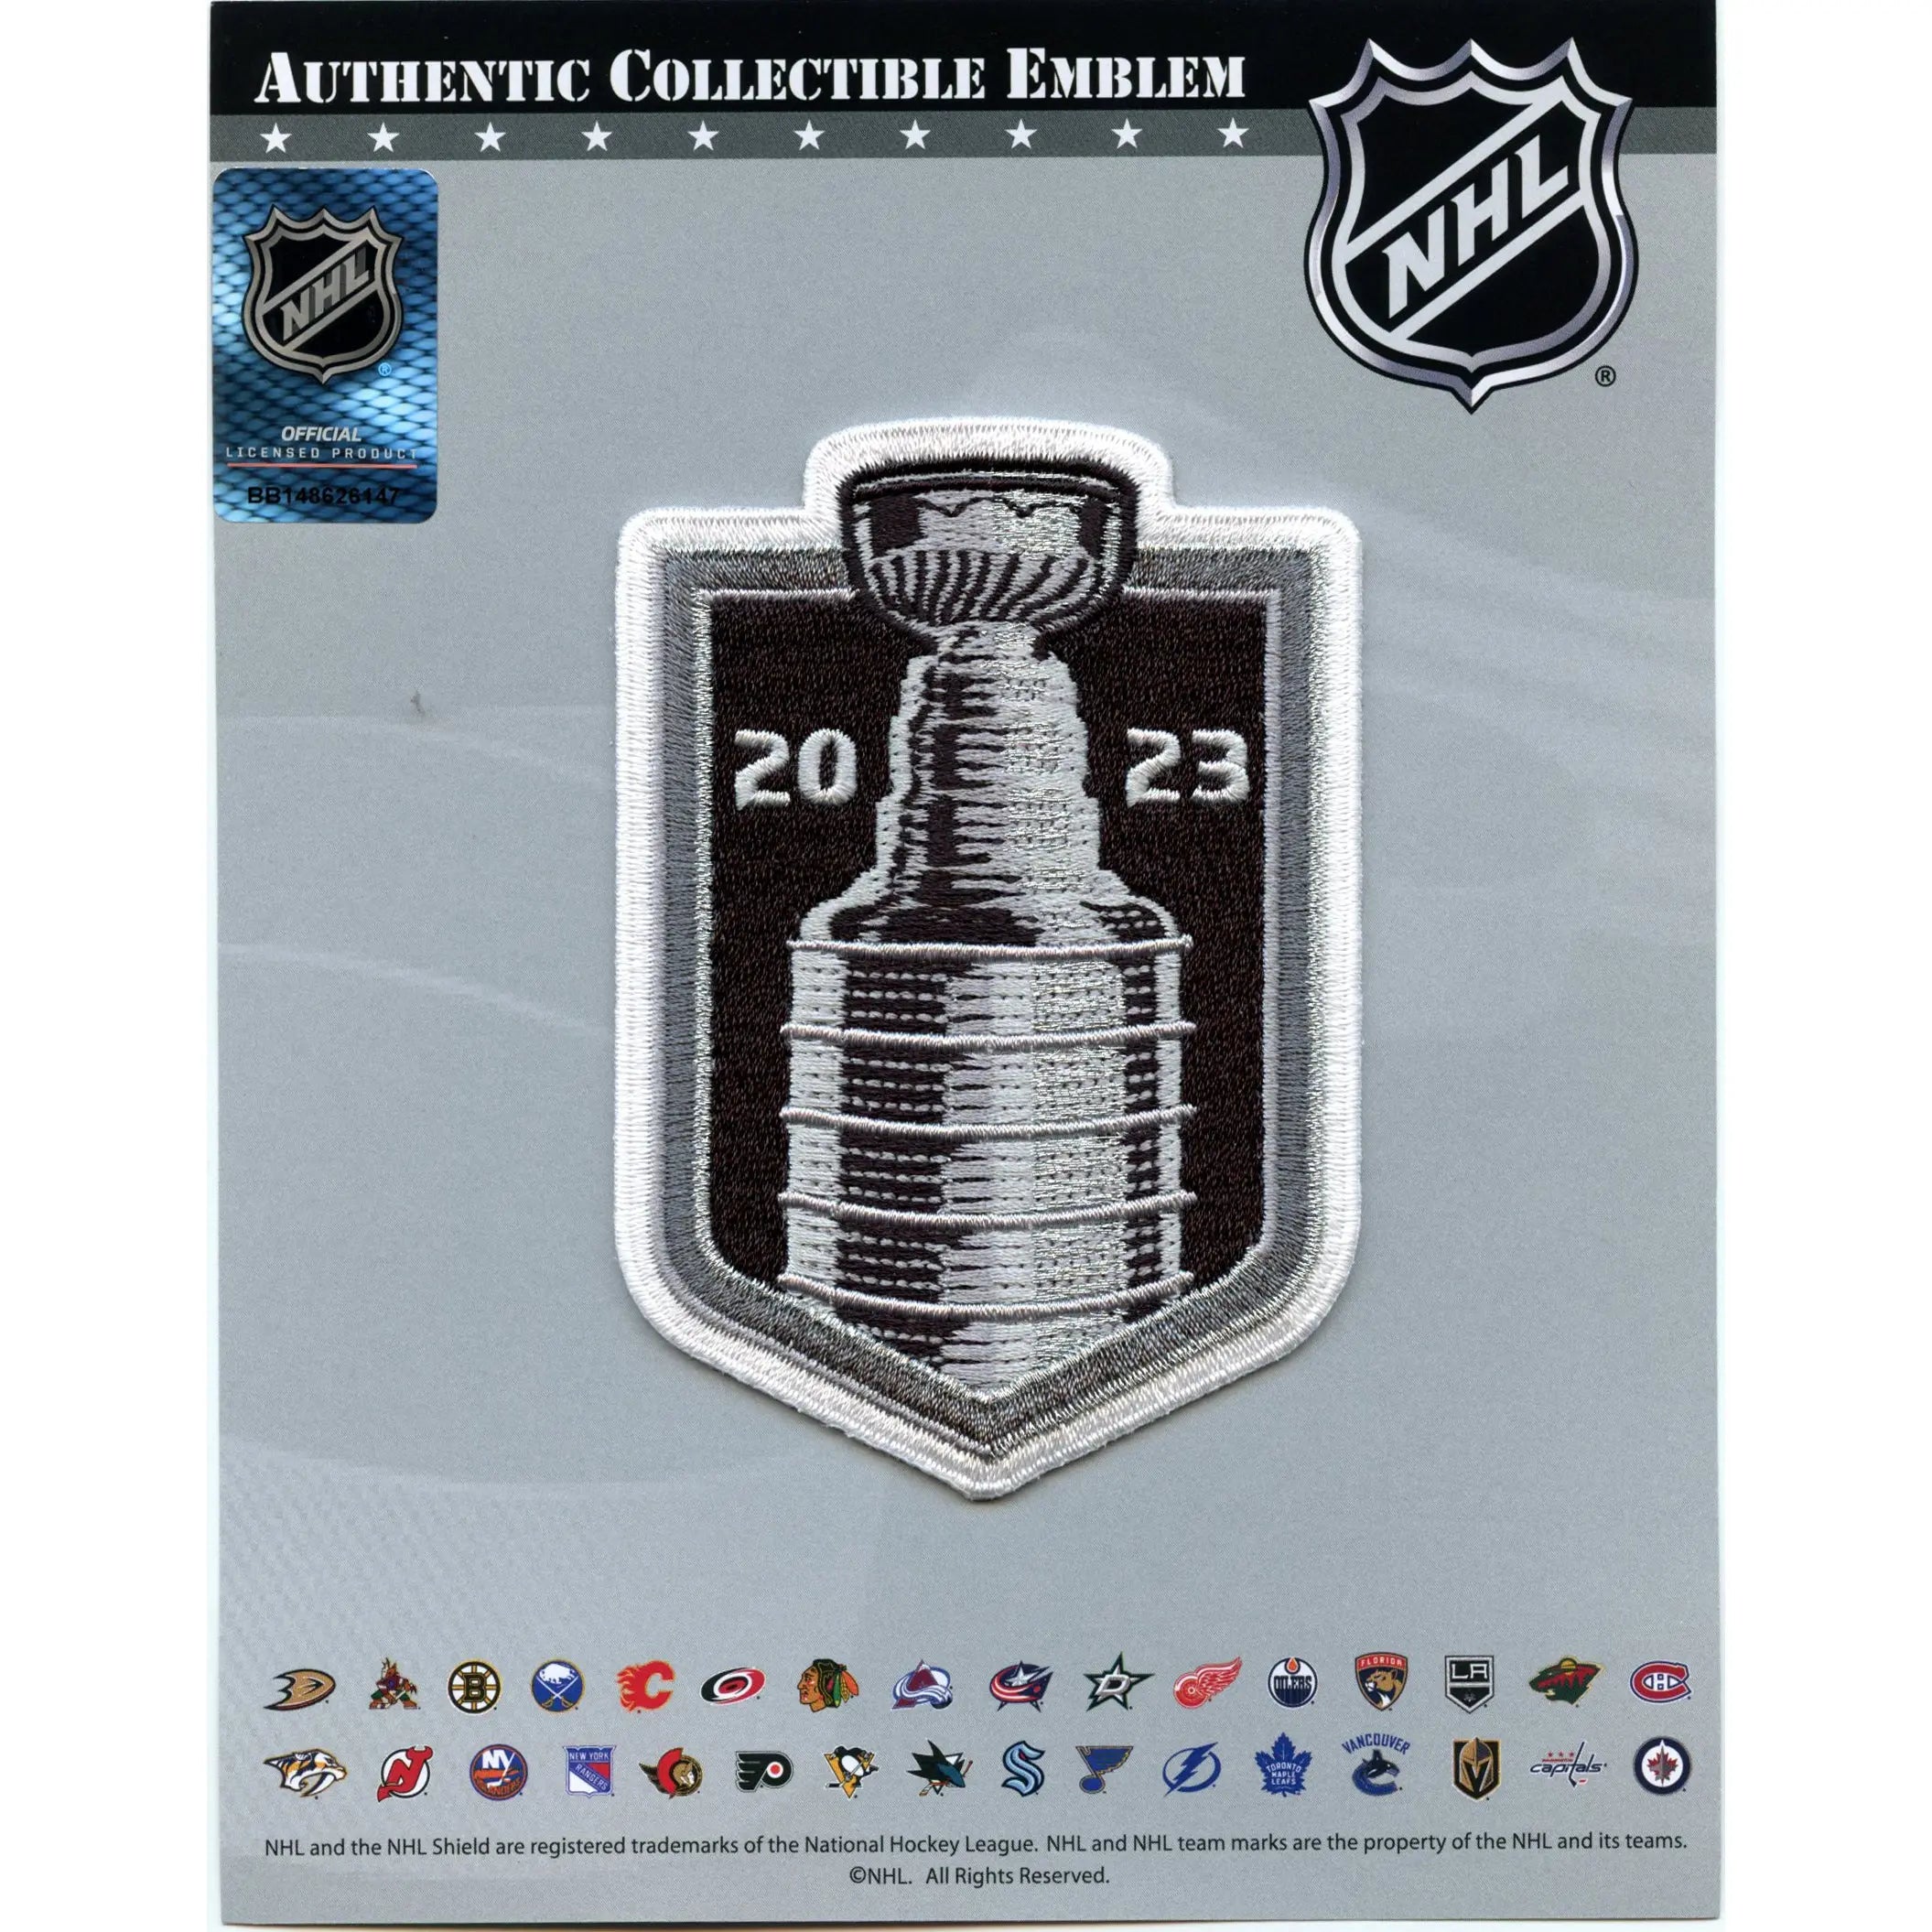 Stanley Cup Teal | Sticker